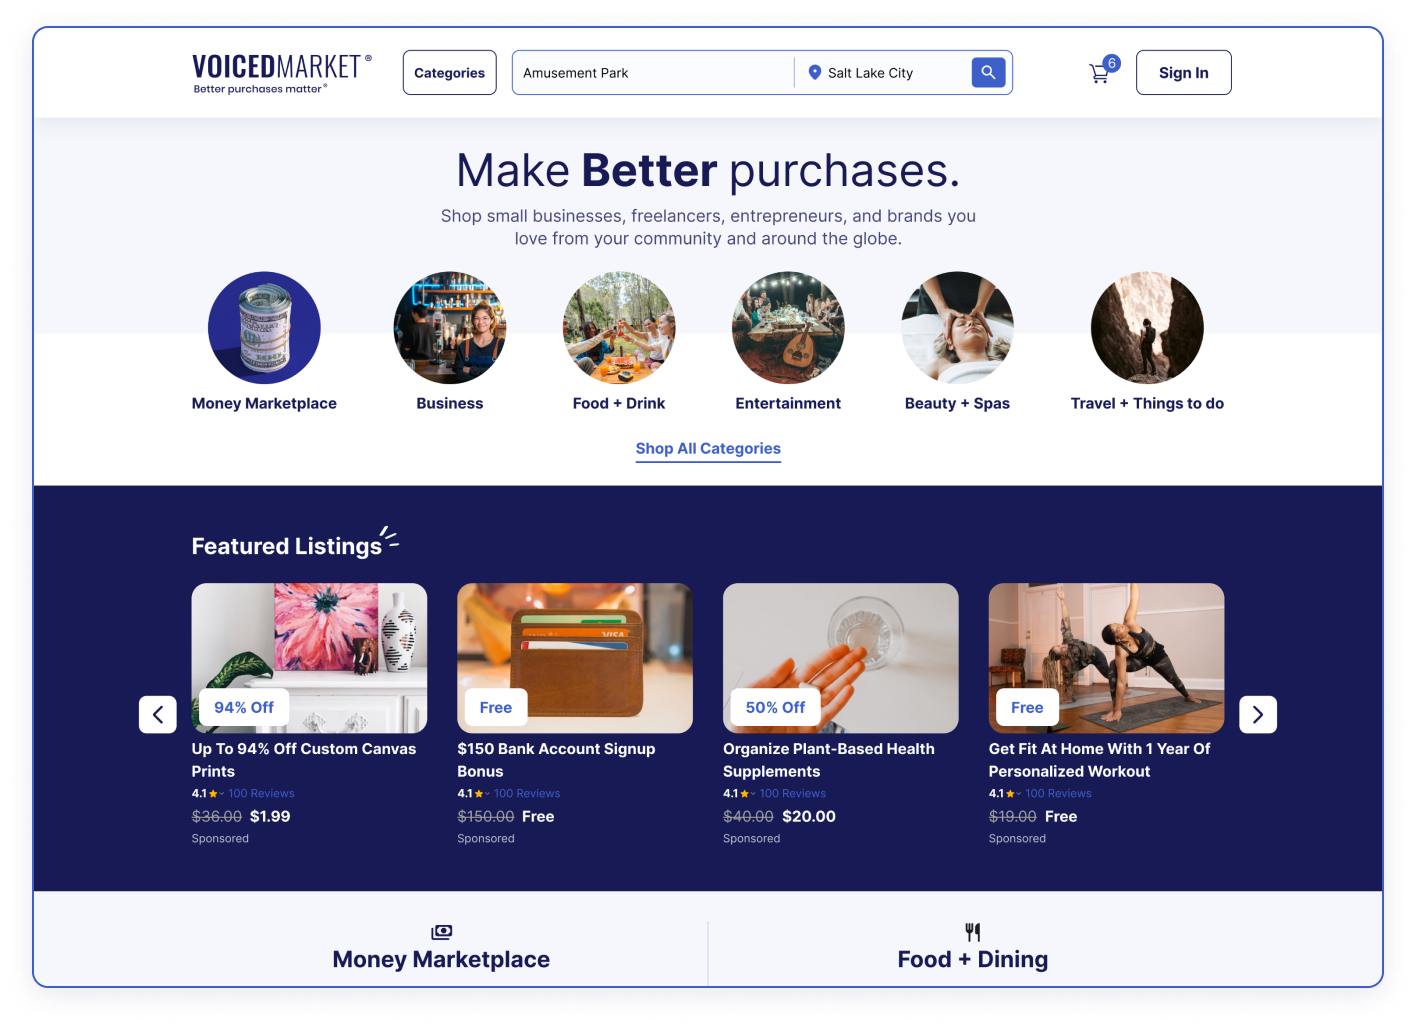 VOICED Market is a marketplace built to help people discover products & services in their area and around the world